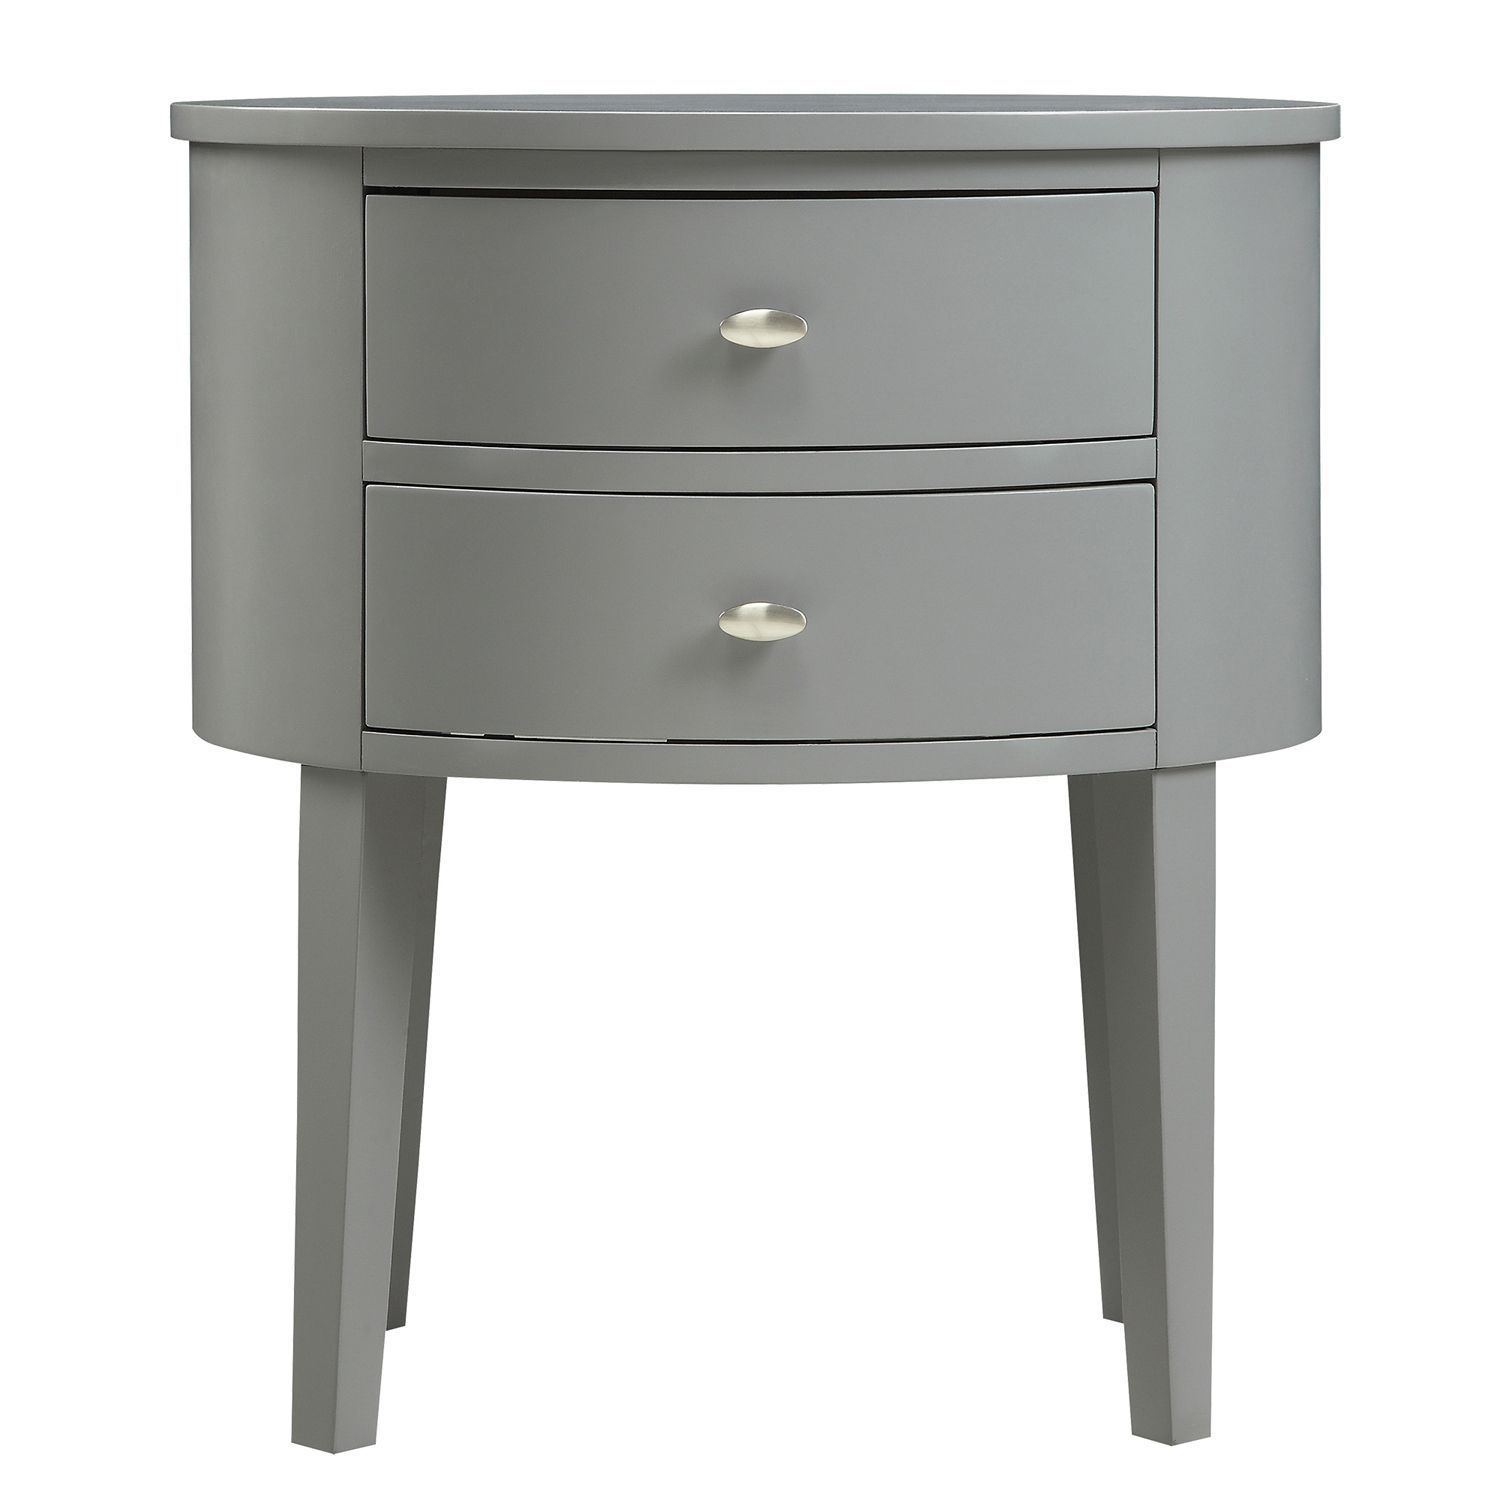 Gray Oval 2 Drawer End Table | End Tables, Table, Drawers Within 2 Drawer Oval Coffee Tables (Photo 6 of 15)